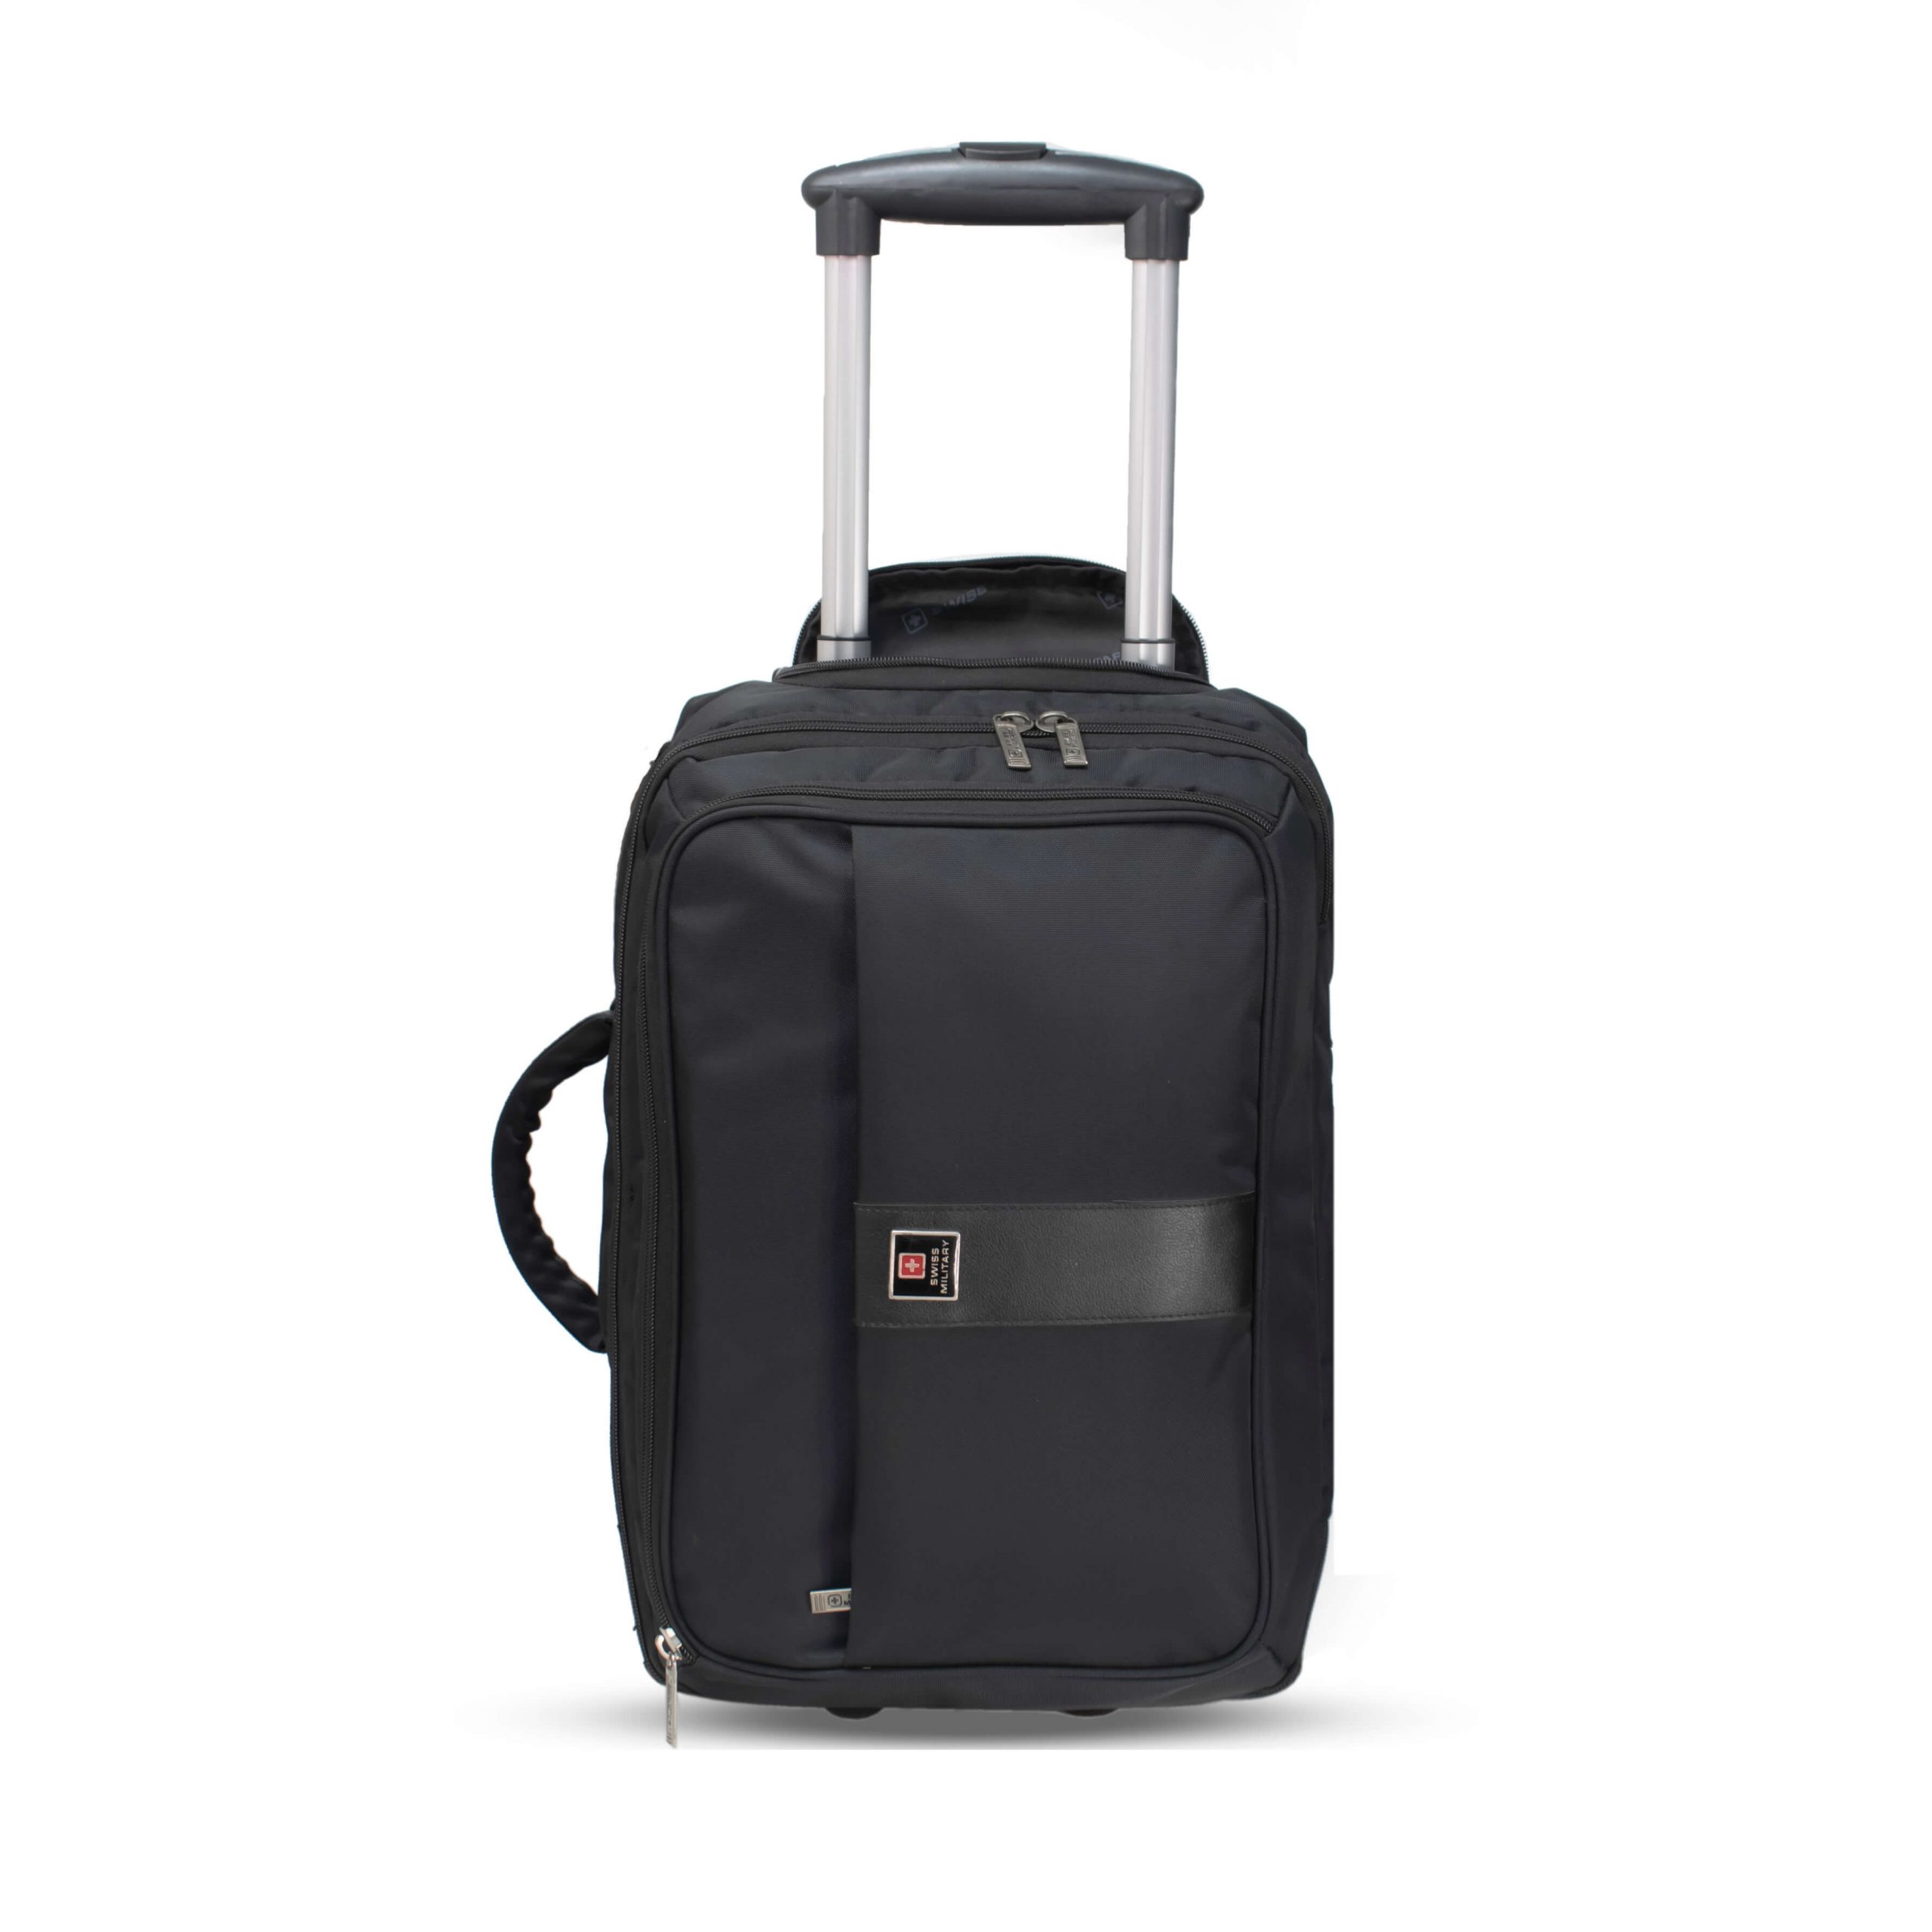 Space Oxford Laptop Overnighter Trolley Bag - Sunrise Trading Co.